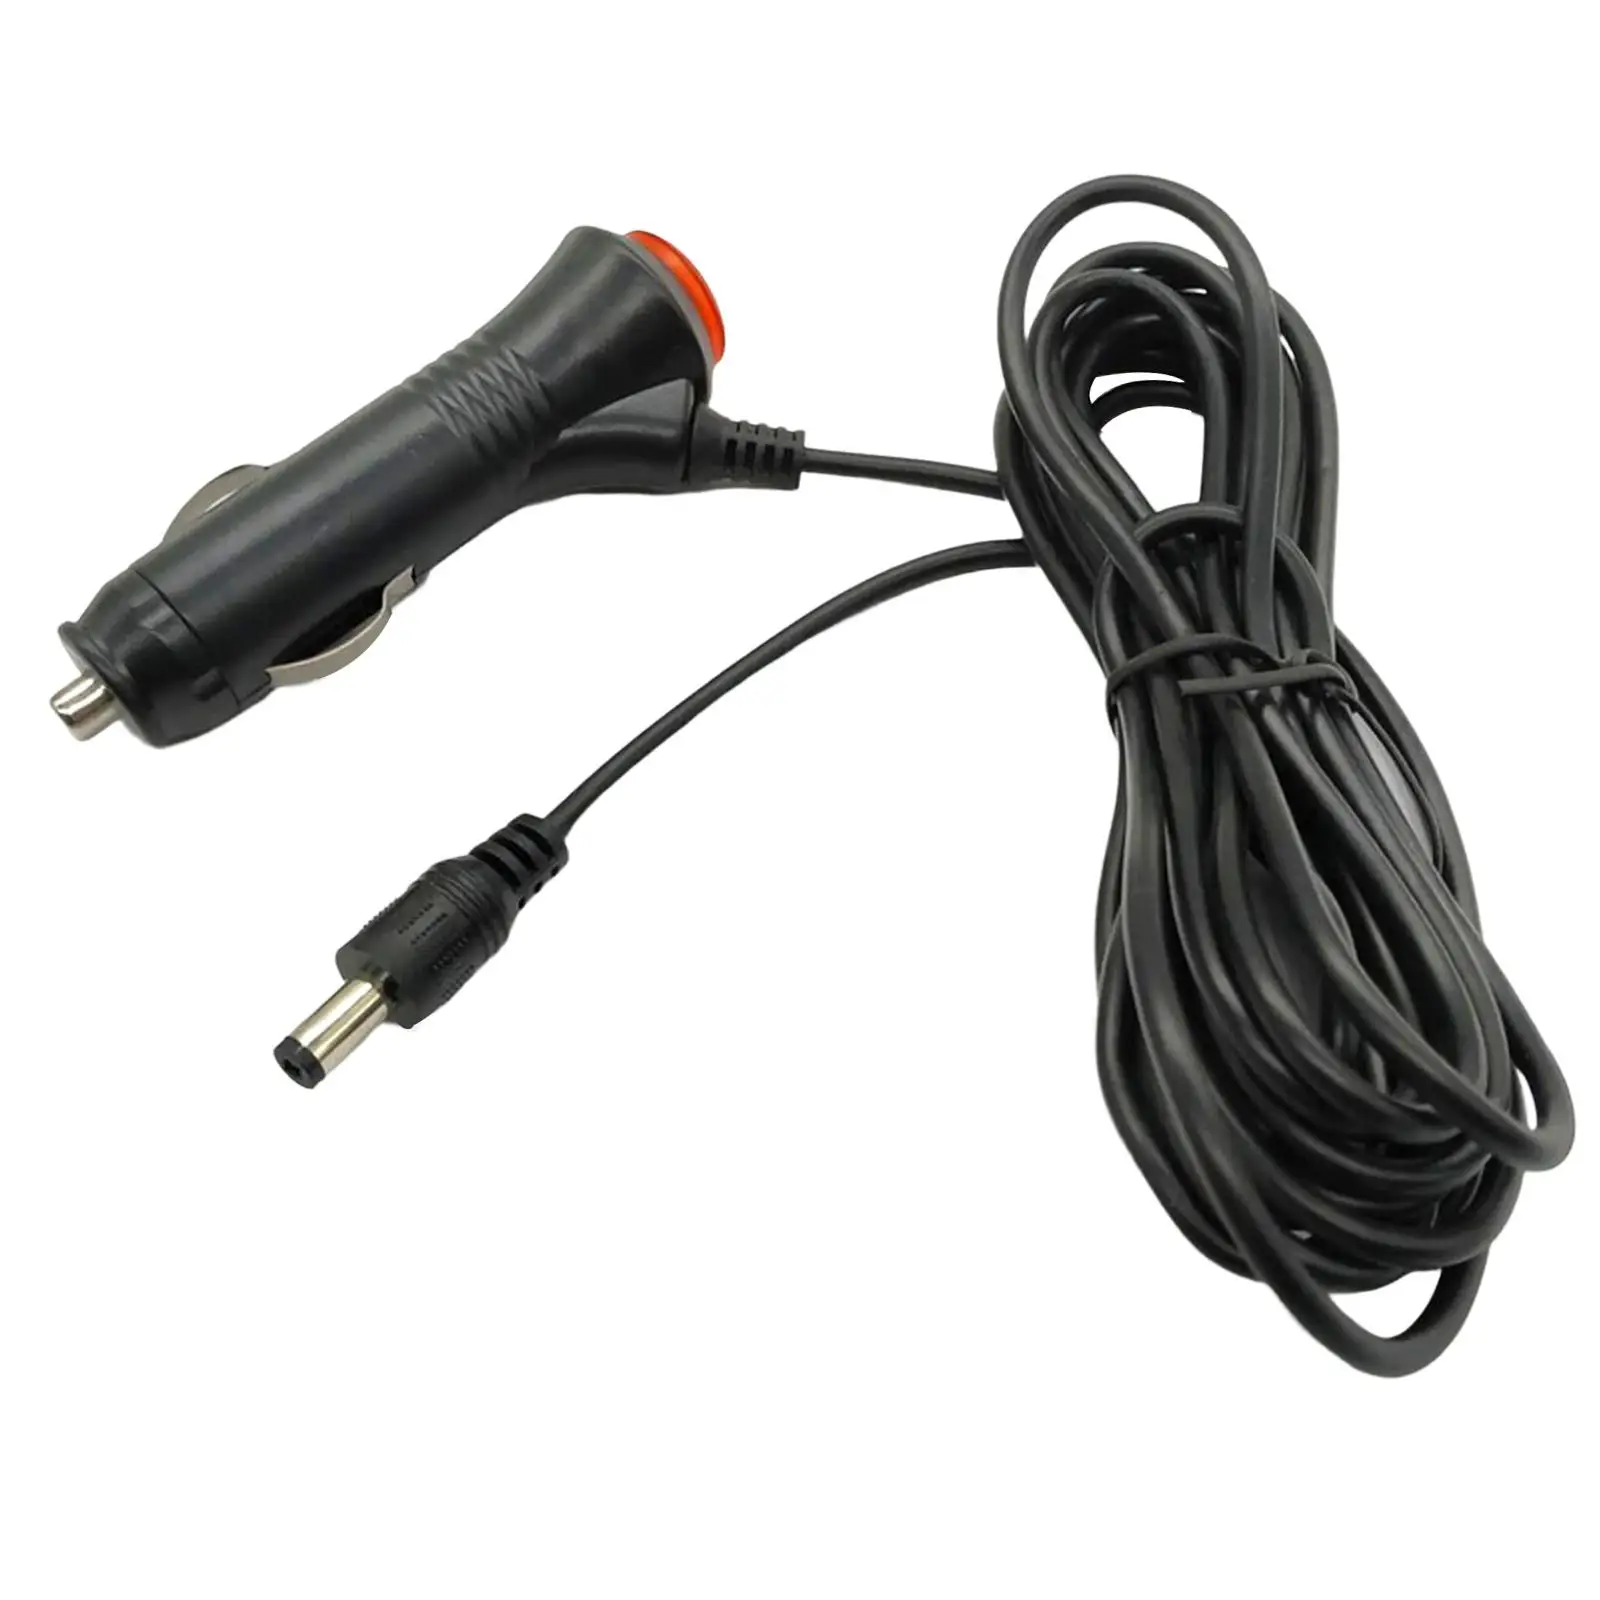 Automotive Car Lighter Charger Cord Power Supply Cable for Camera